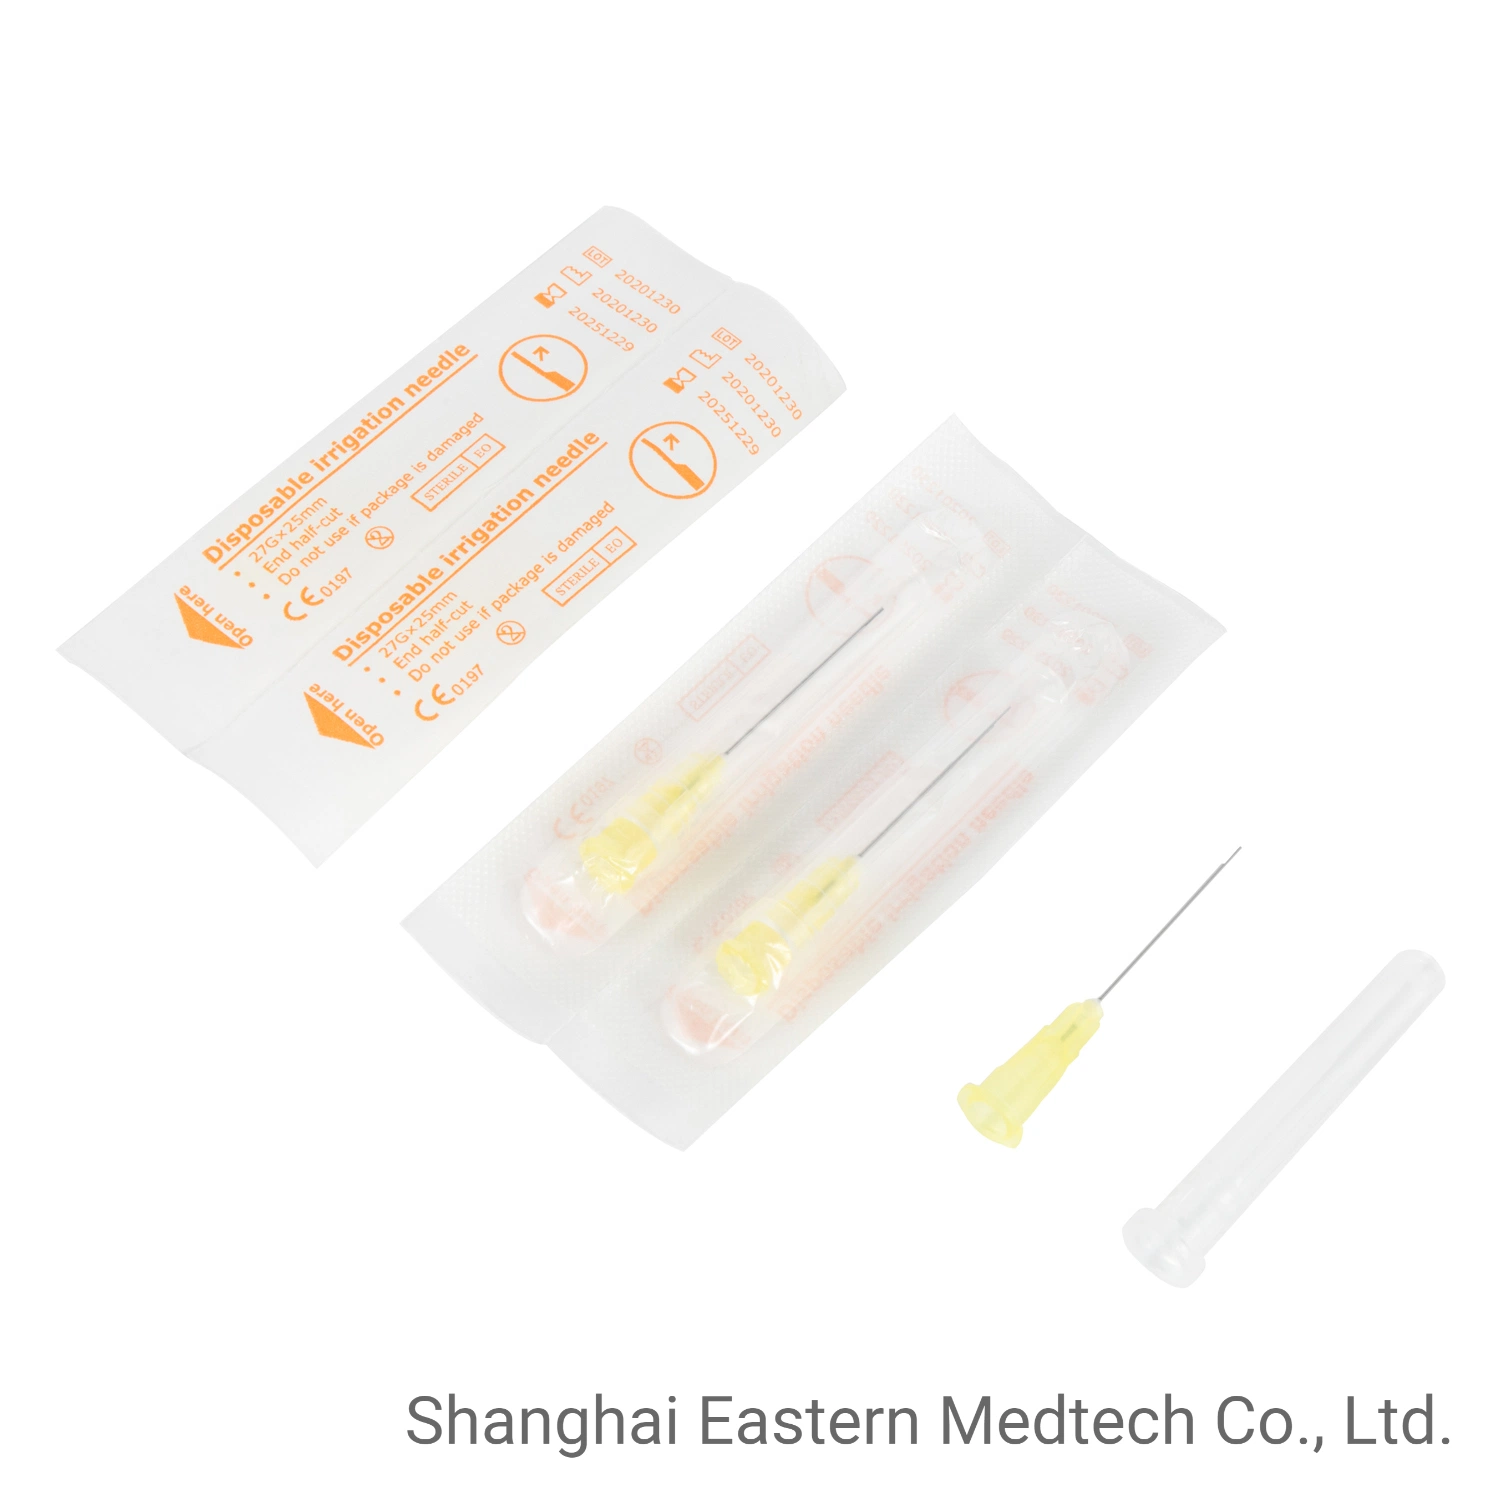 Disposable Medical Products for Dentist Use 23G/25g/ 27g / 30g Endo Irrigation Needle Tip 6: 100 Dental Application Needle